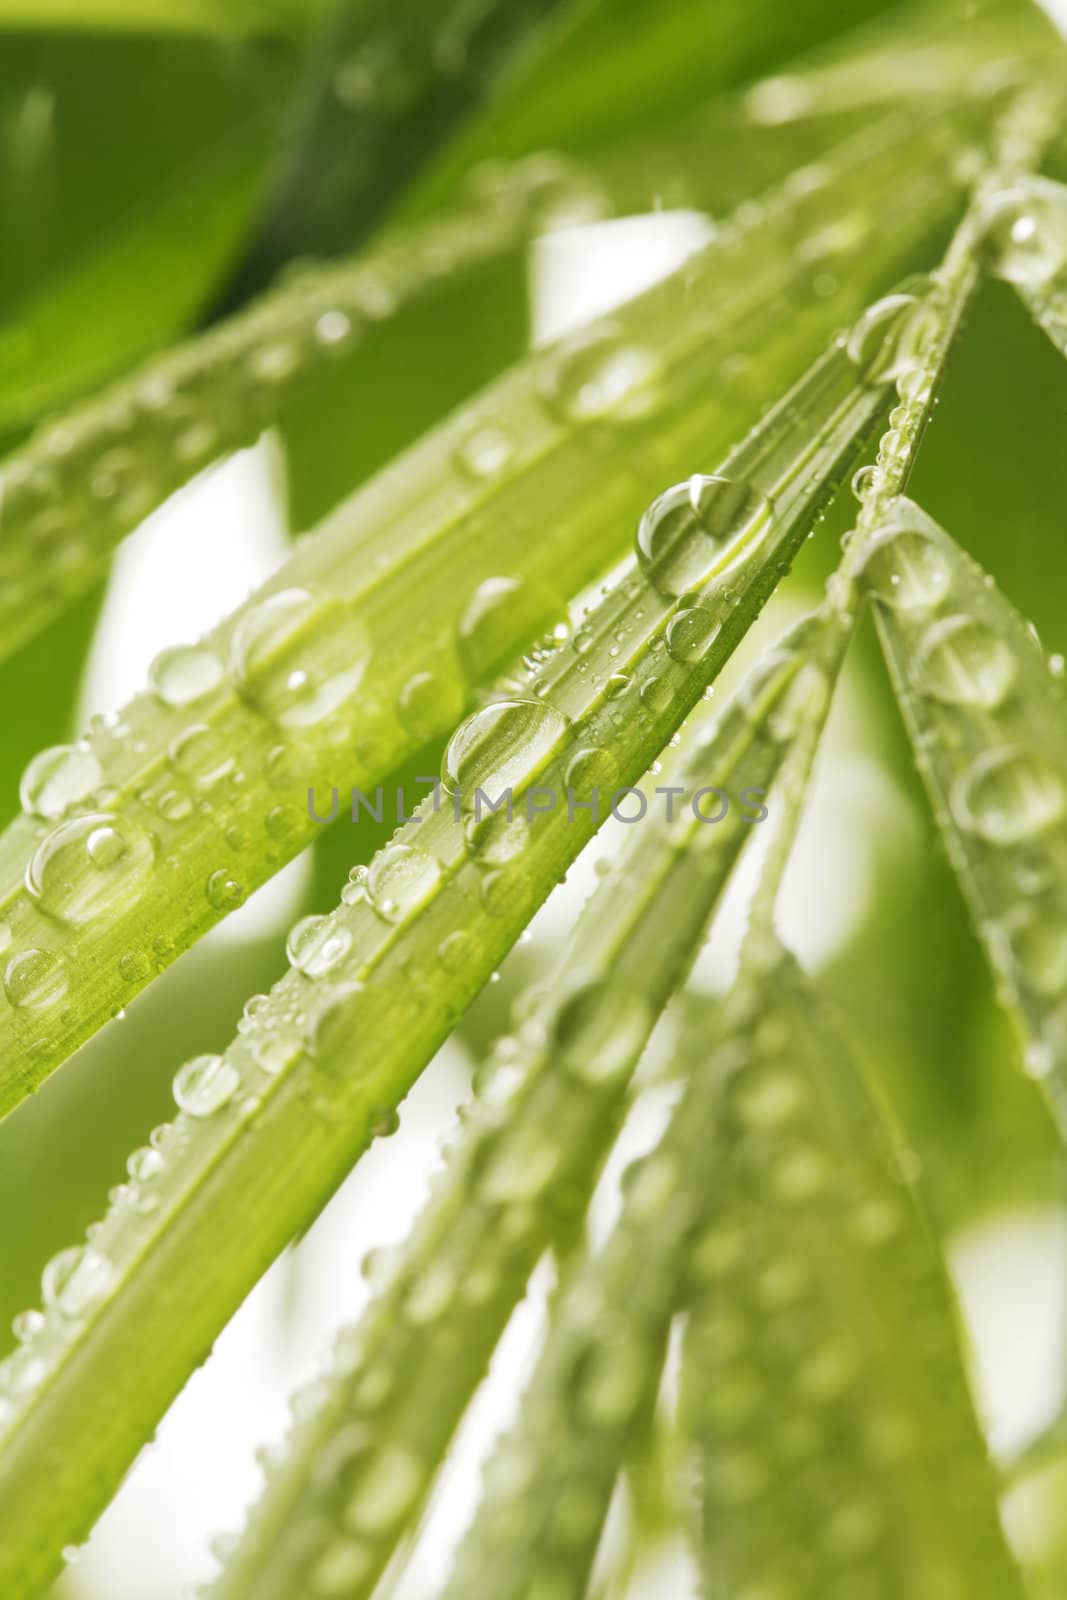 Water beads on green plant leaves